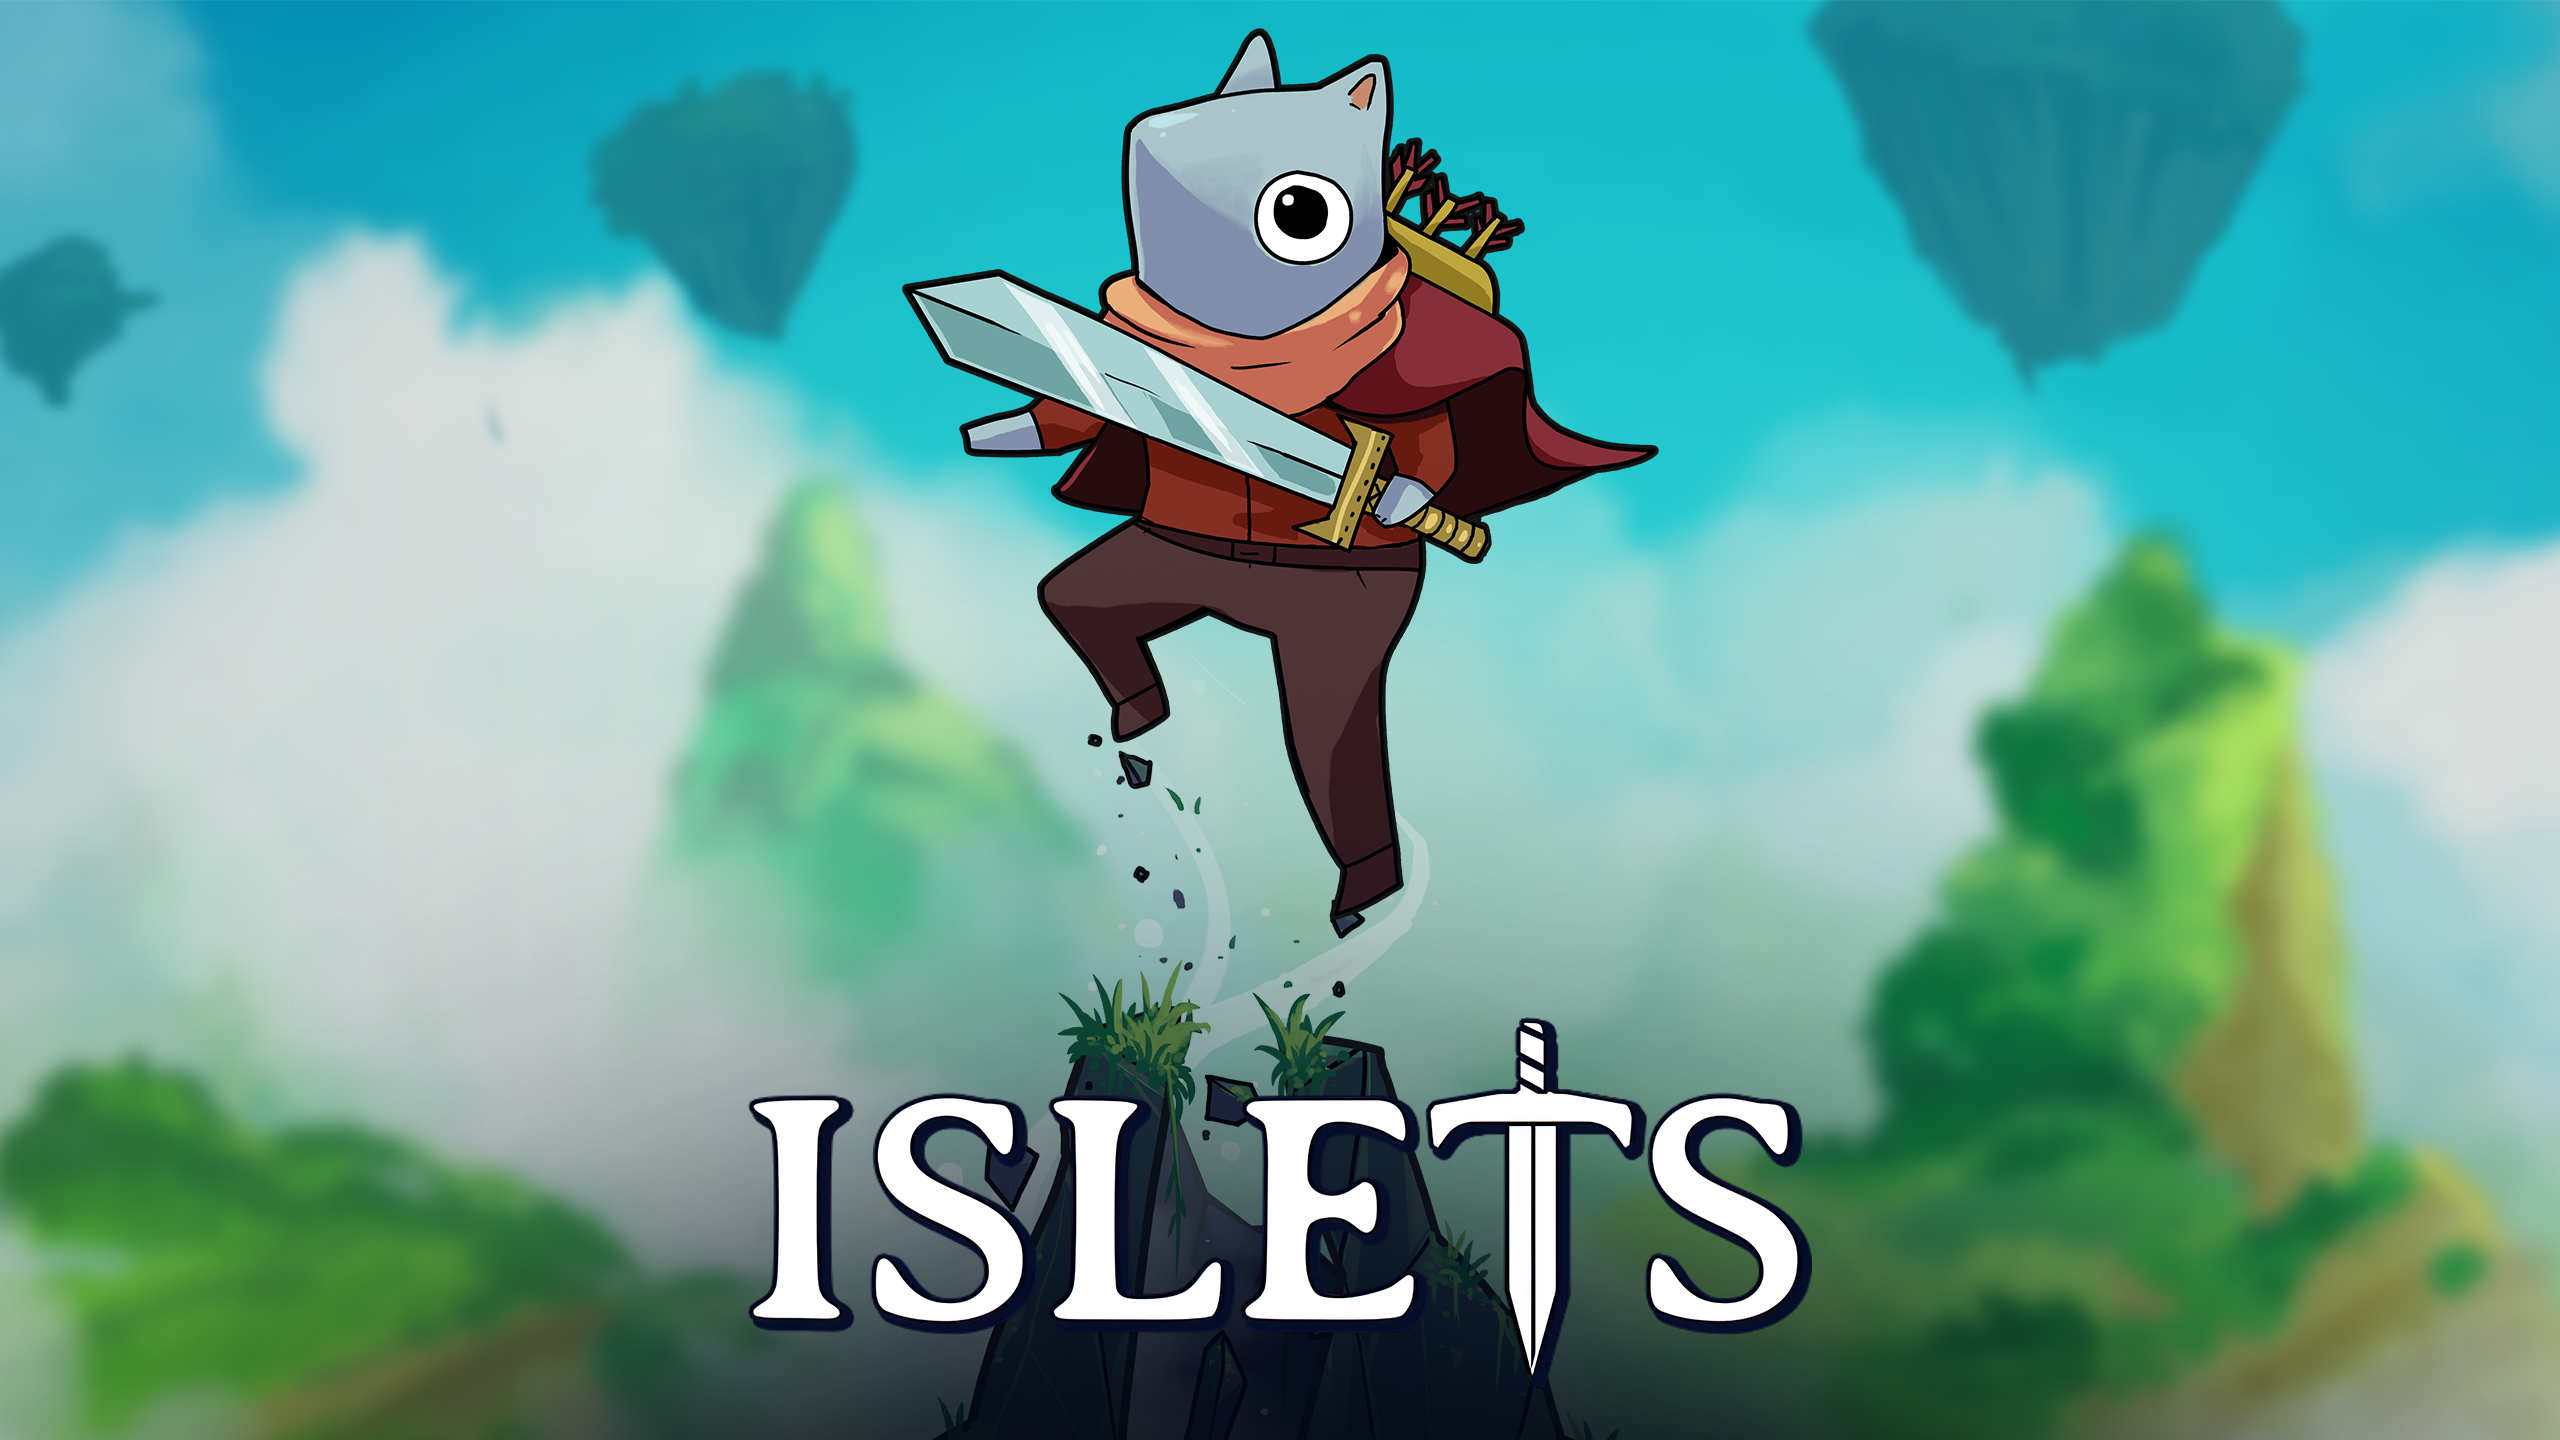 Video Game Islets HD Wallpaper